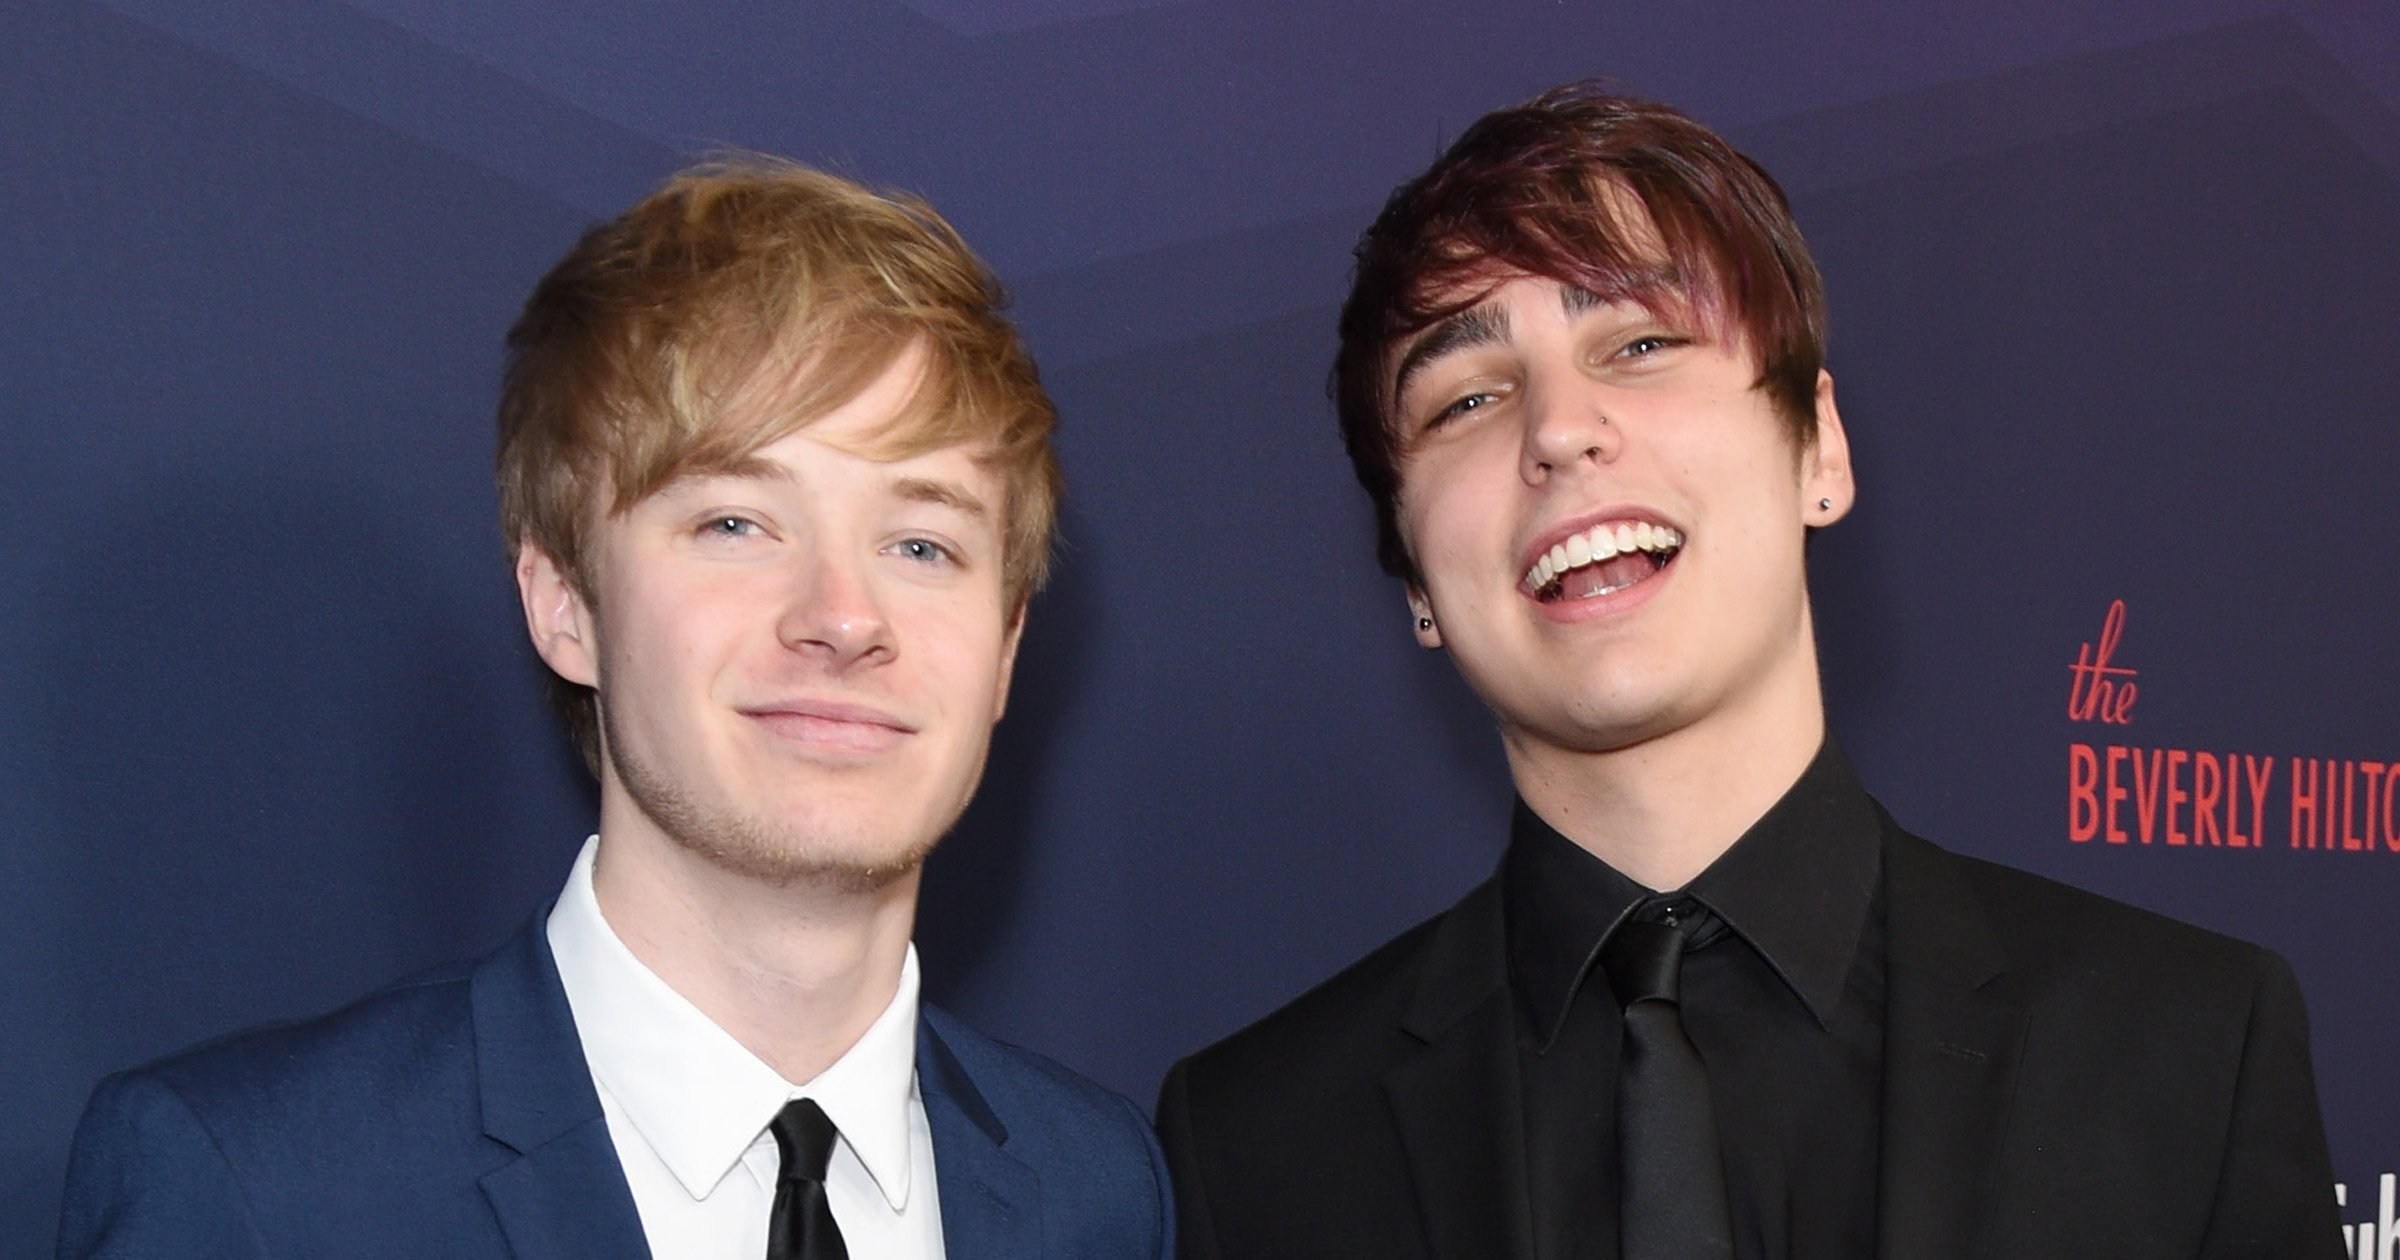 YouTubers Sam and Colby reveal why getting arrested was ‘blessing in disguise’ for paranormal videos